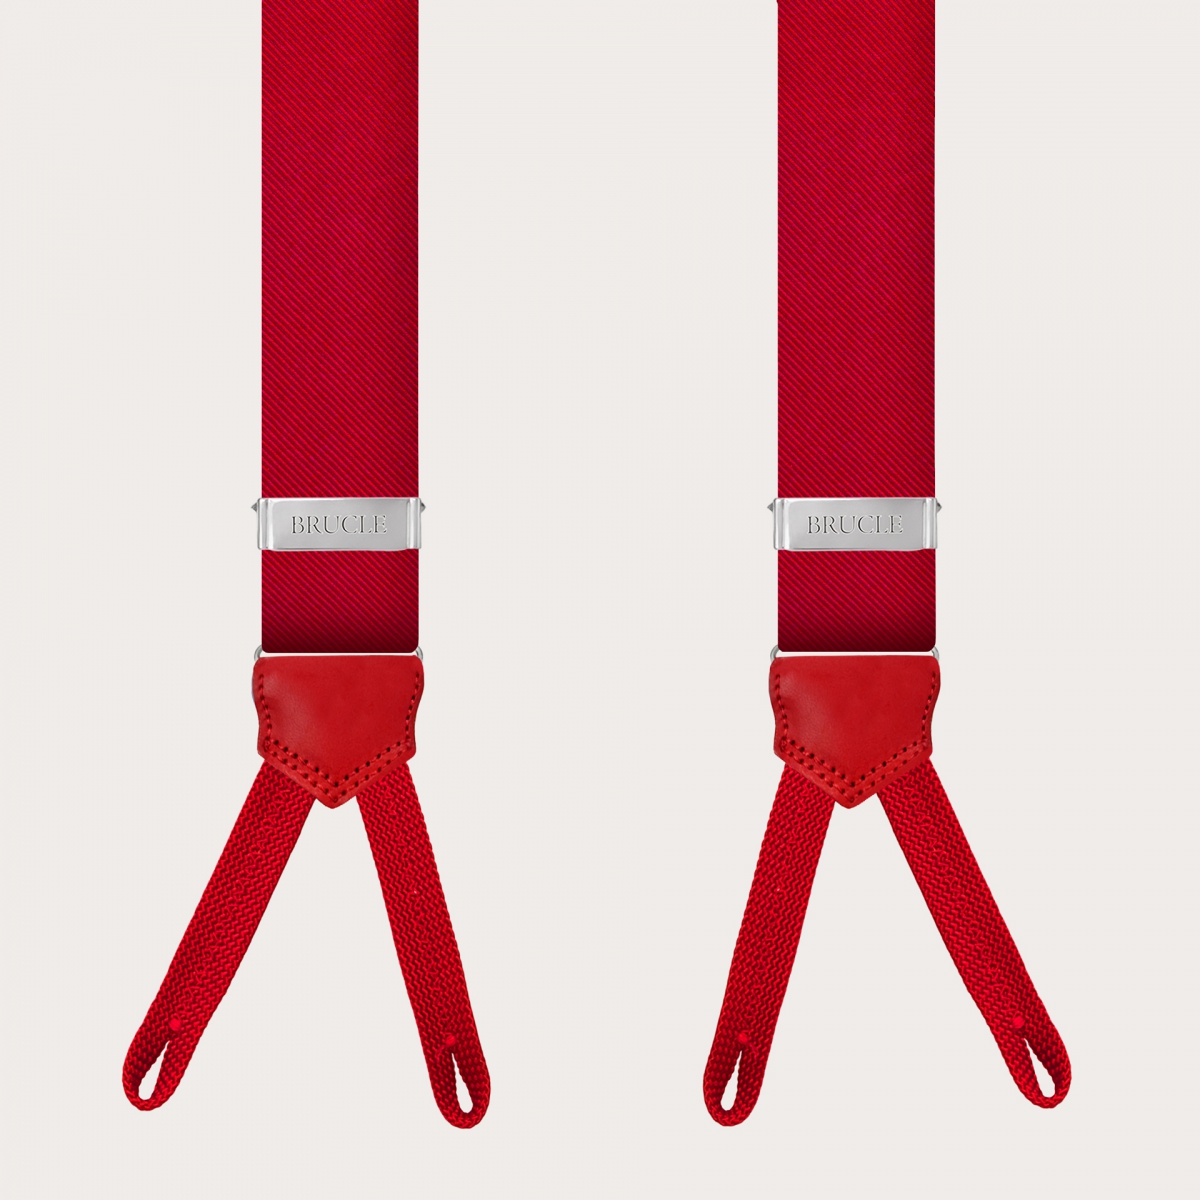 Vibrant red silk suspenders with button loops